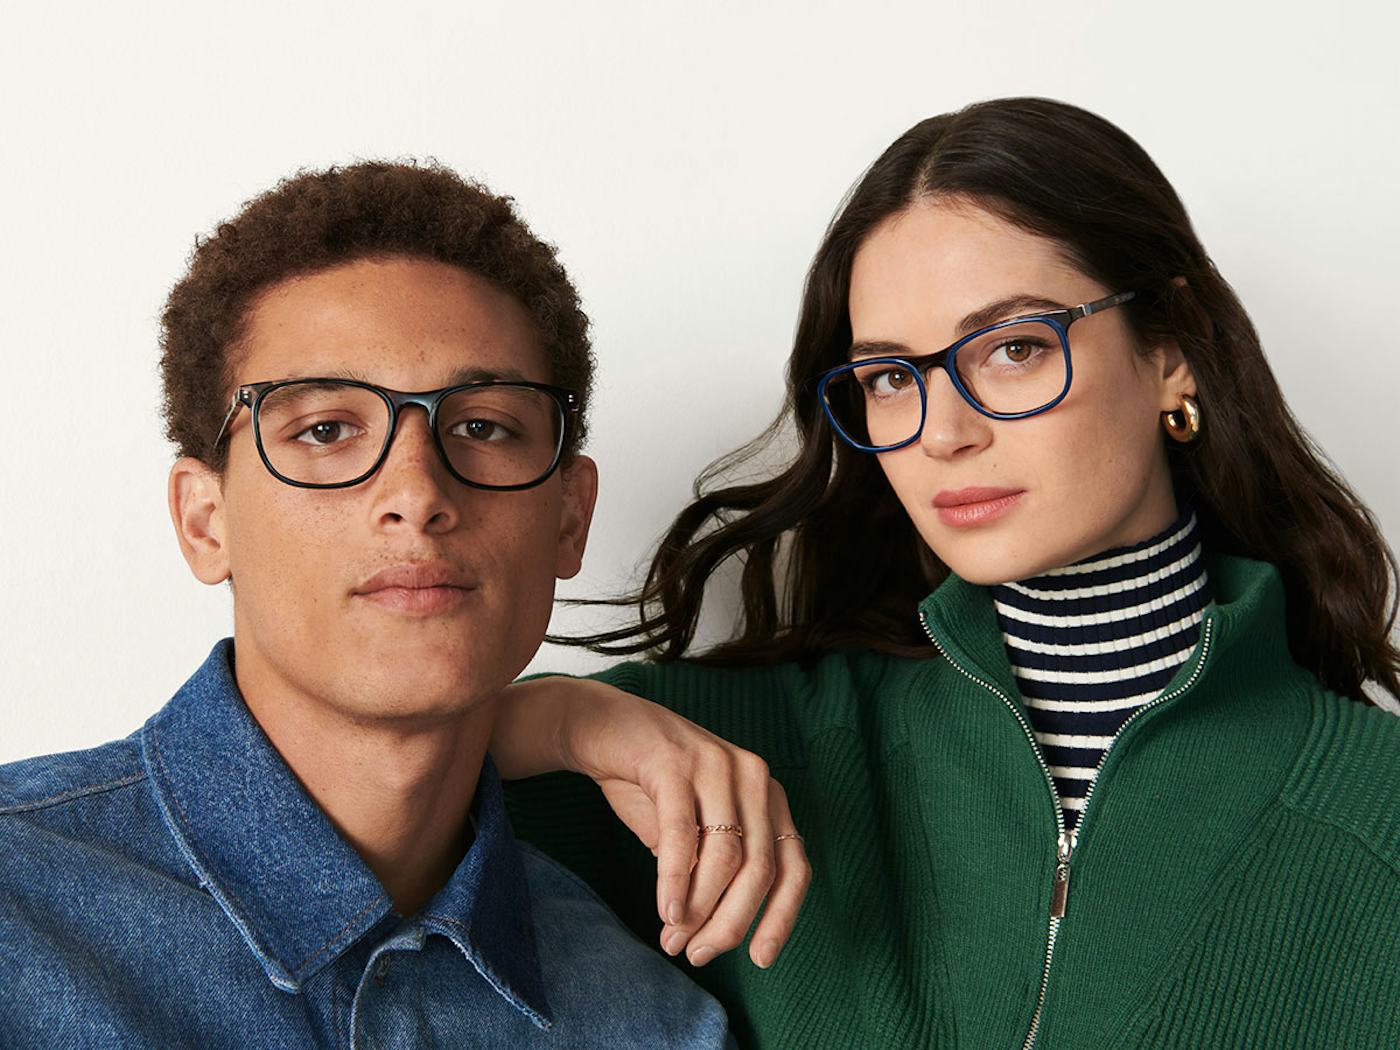 A young man and woman wearing stylish eyeglasses pose together against a plain background. The man dons a denim shirt; the woman sports a green jacket.